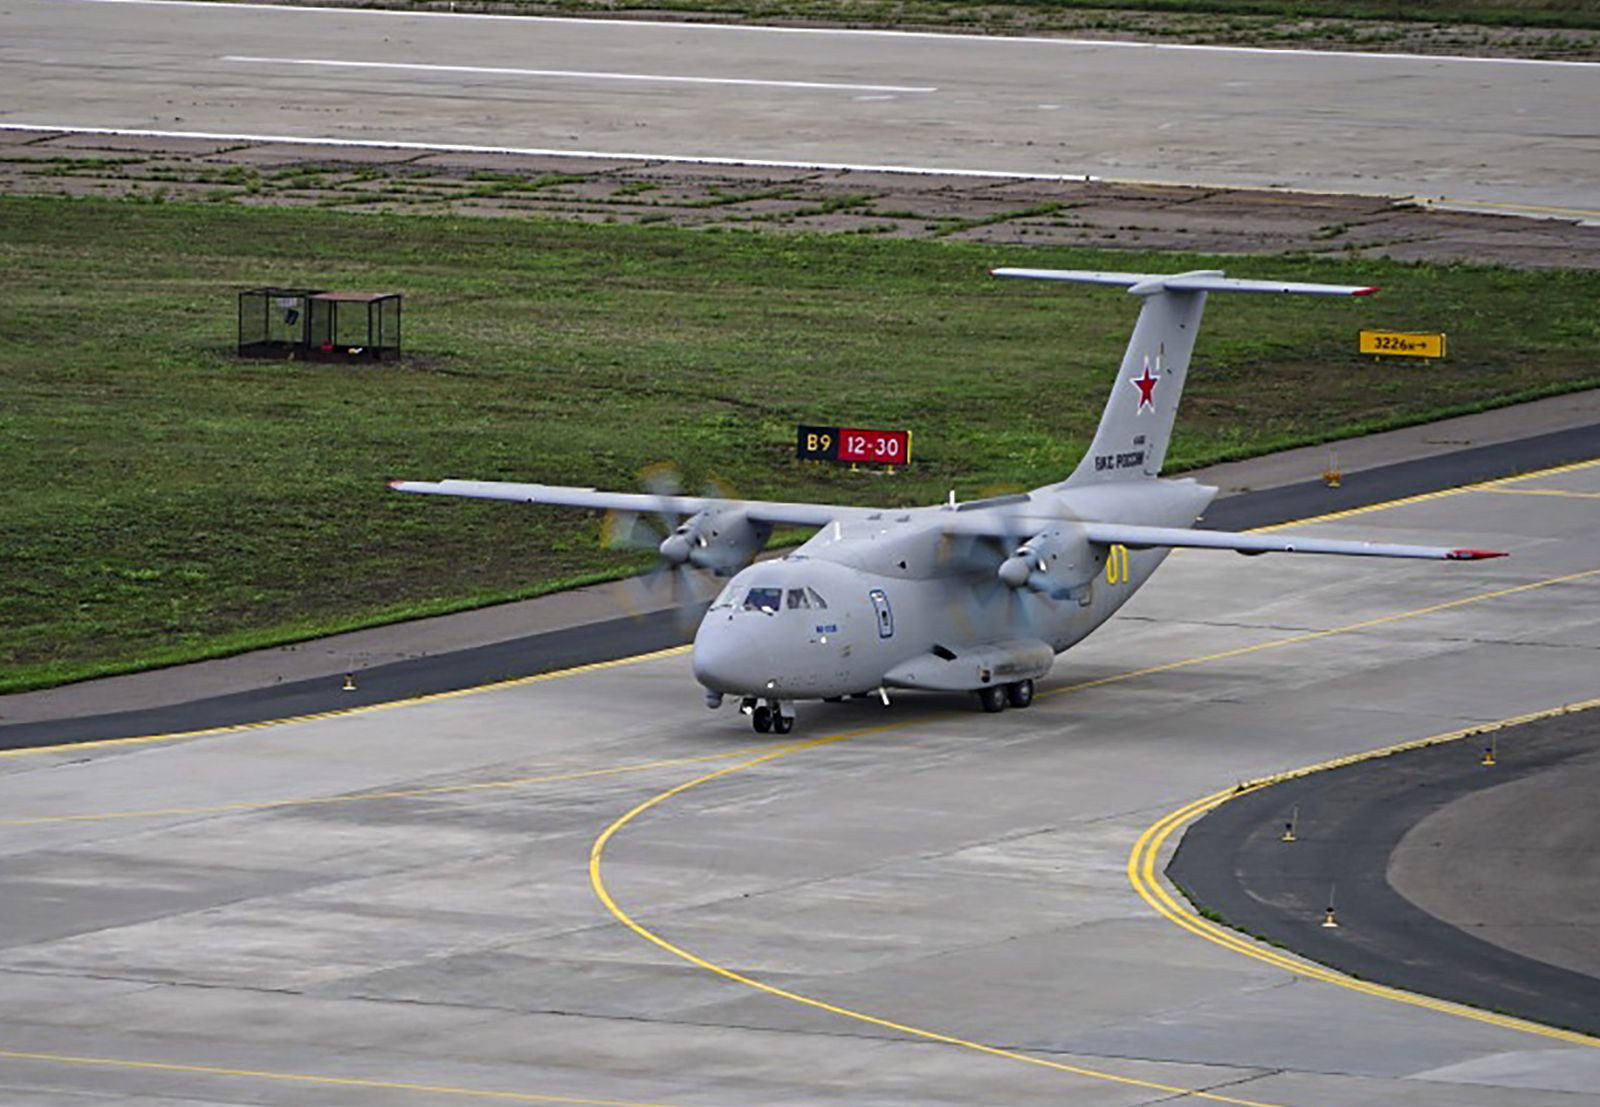 epa09417631 A handout photo made available by the Russian Ilyushin Aviation Complex cmpany shows the new Ilyushin Il-112 high-wing light military transport aircraft taxying at Kubinka airport to be presented in the Army 2021 exhibition in Kubinka, Russia, 13 August 2021 (issued 17 August 2021). An IL-112V military transport plane prototype crashed on 17 August 2021 in the Moscow region, the Russian Emergency Services confirmed. Three people aboard the plane are presumed dead.  EPA/ILYUSHIN PRESS CENTER HANDOUT  HANDOUT EDITORIAL USE ONLY/NO SALES